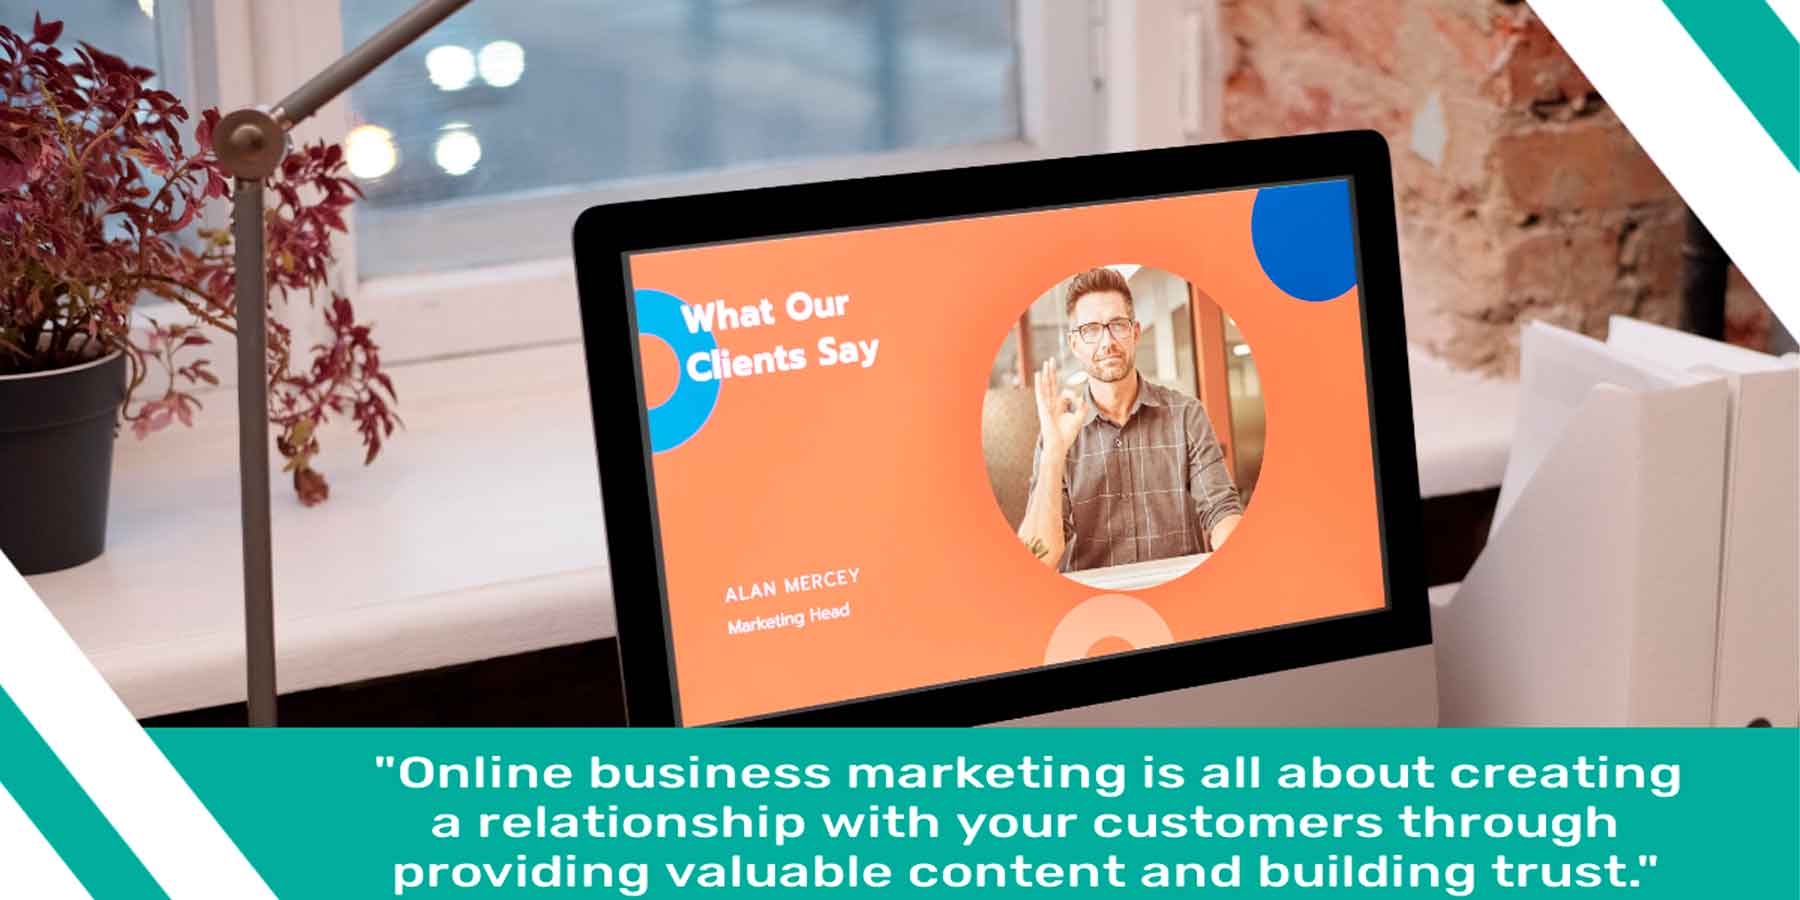 Online business marketing is all about creating a relationship with your customers through providing valuable content and building trust